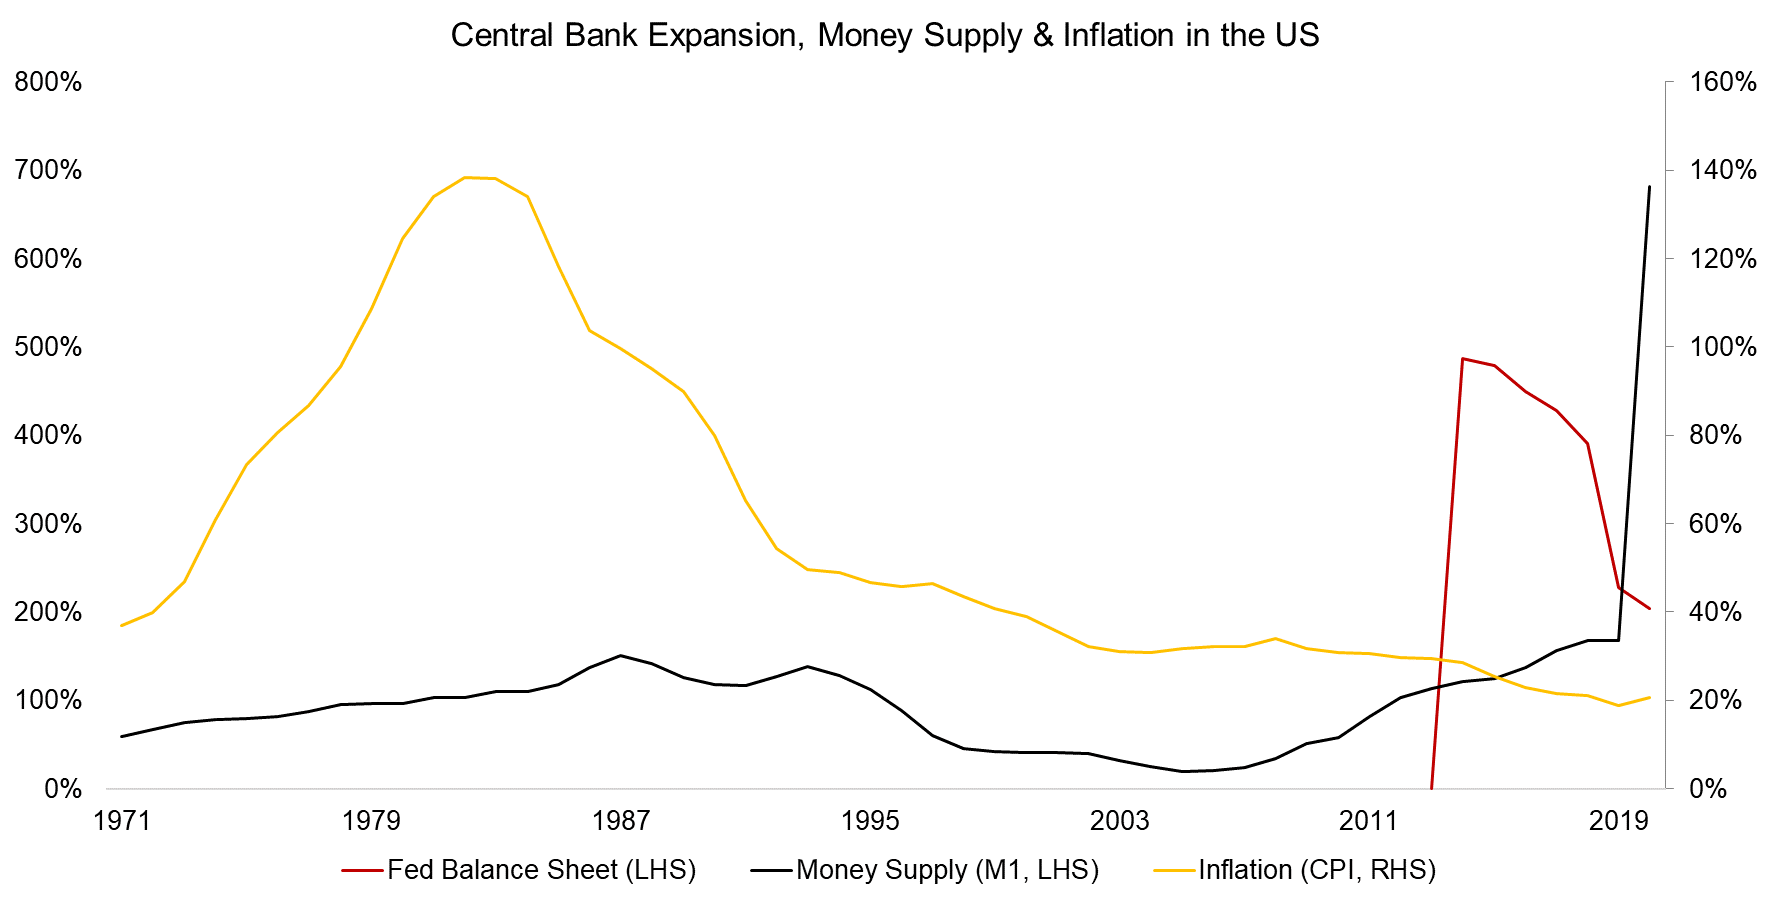 Central Bank Expansion, Money Supply & Inflation in the US